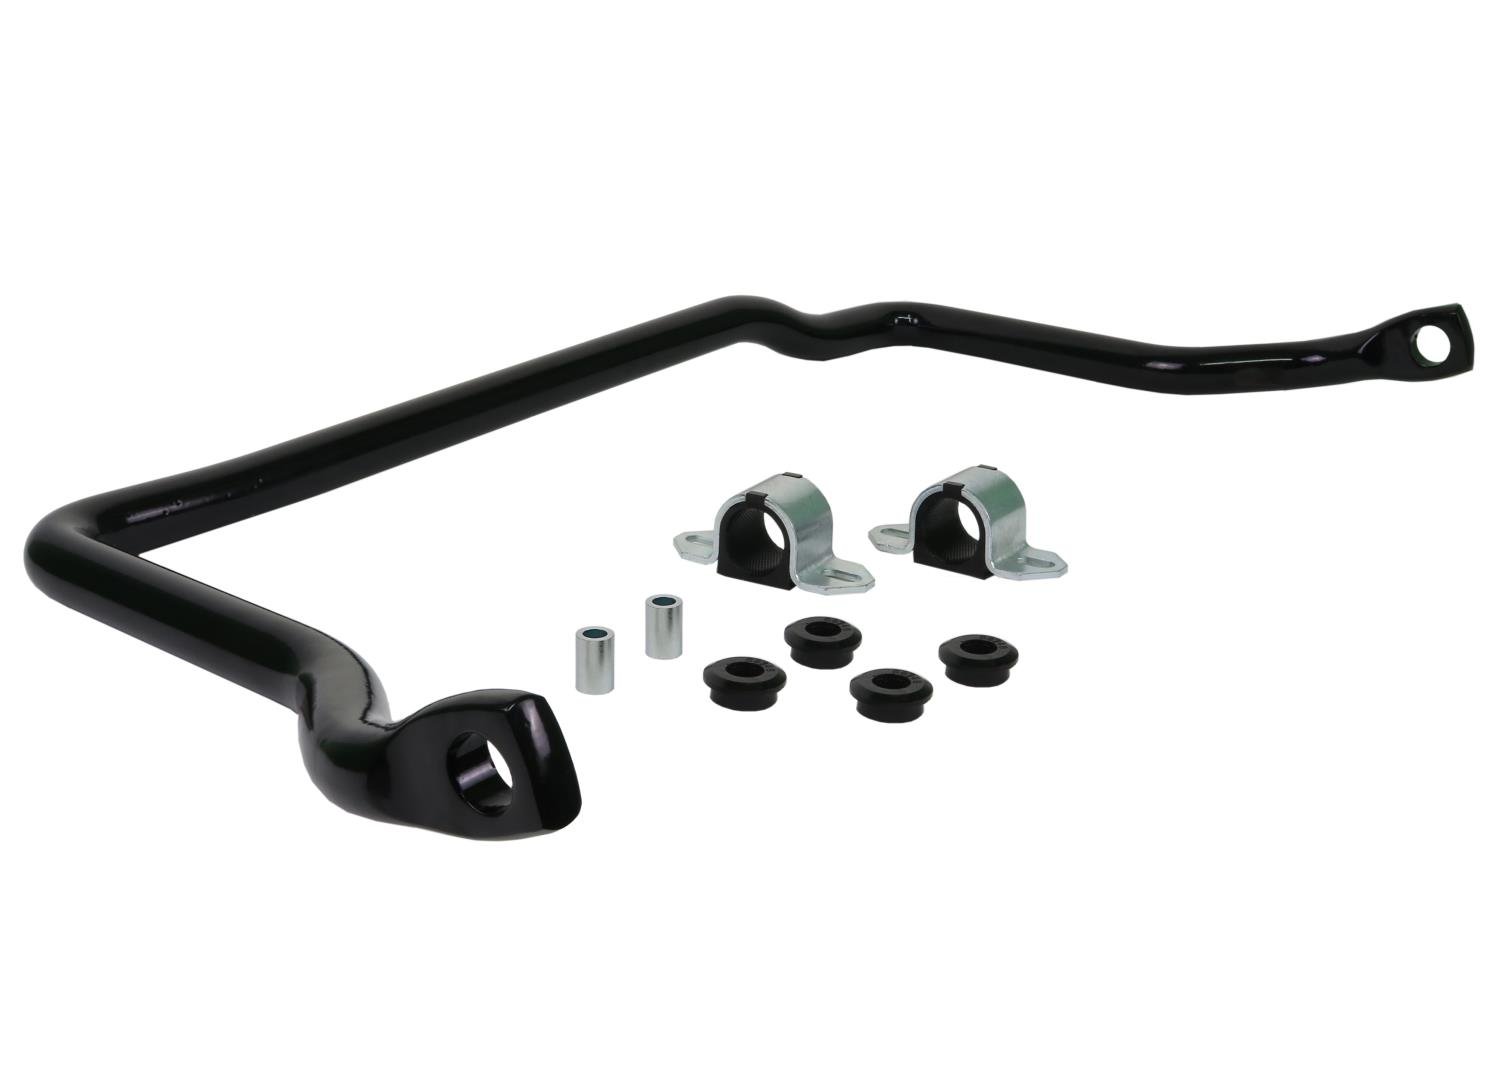 BTF66X Front 32 mm X Heavy Duty Fixed Sway Bar for 1993-1998 Toyota Landcruiser 80, 100, 105 Series